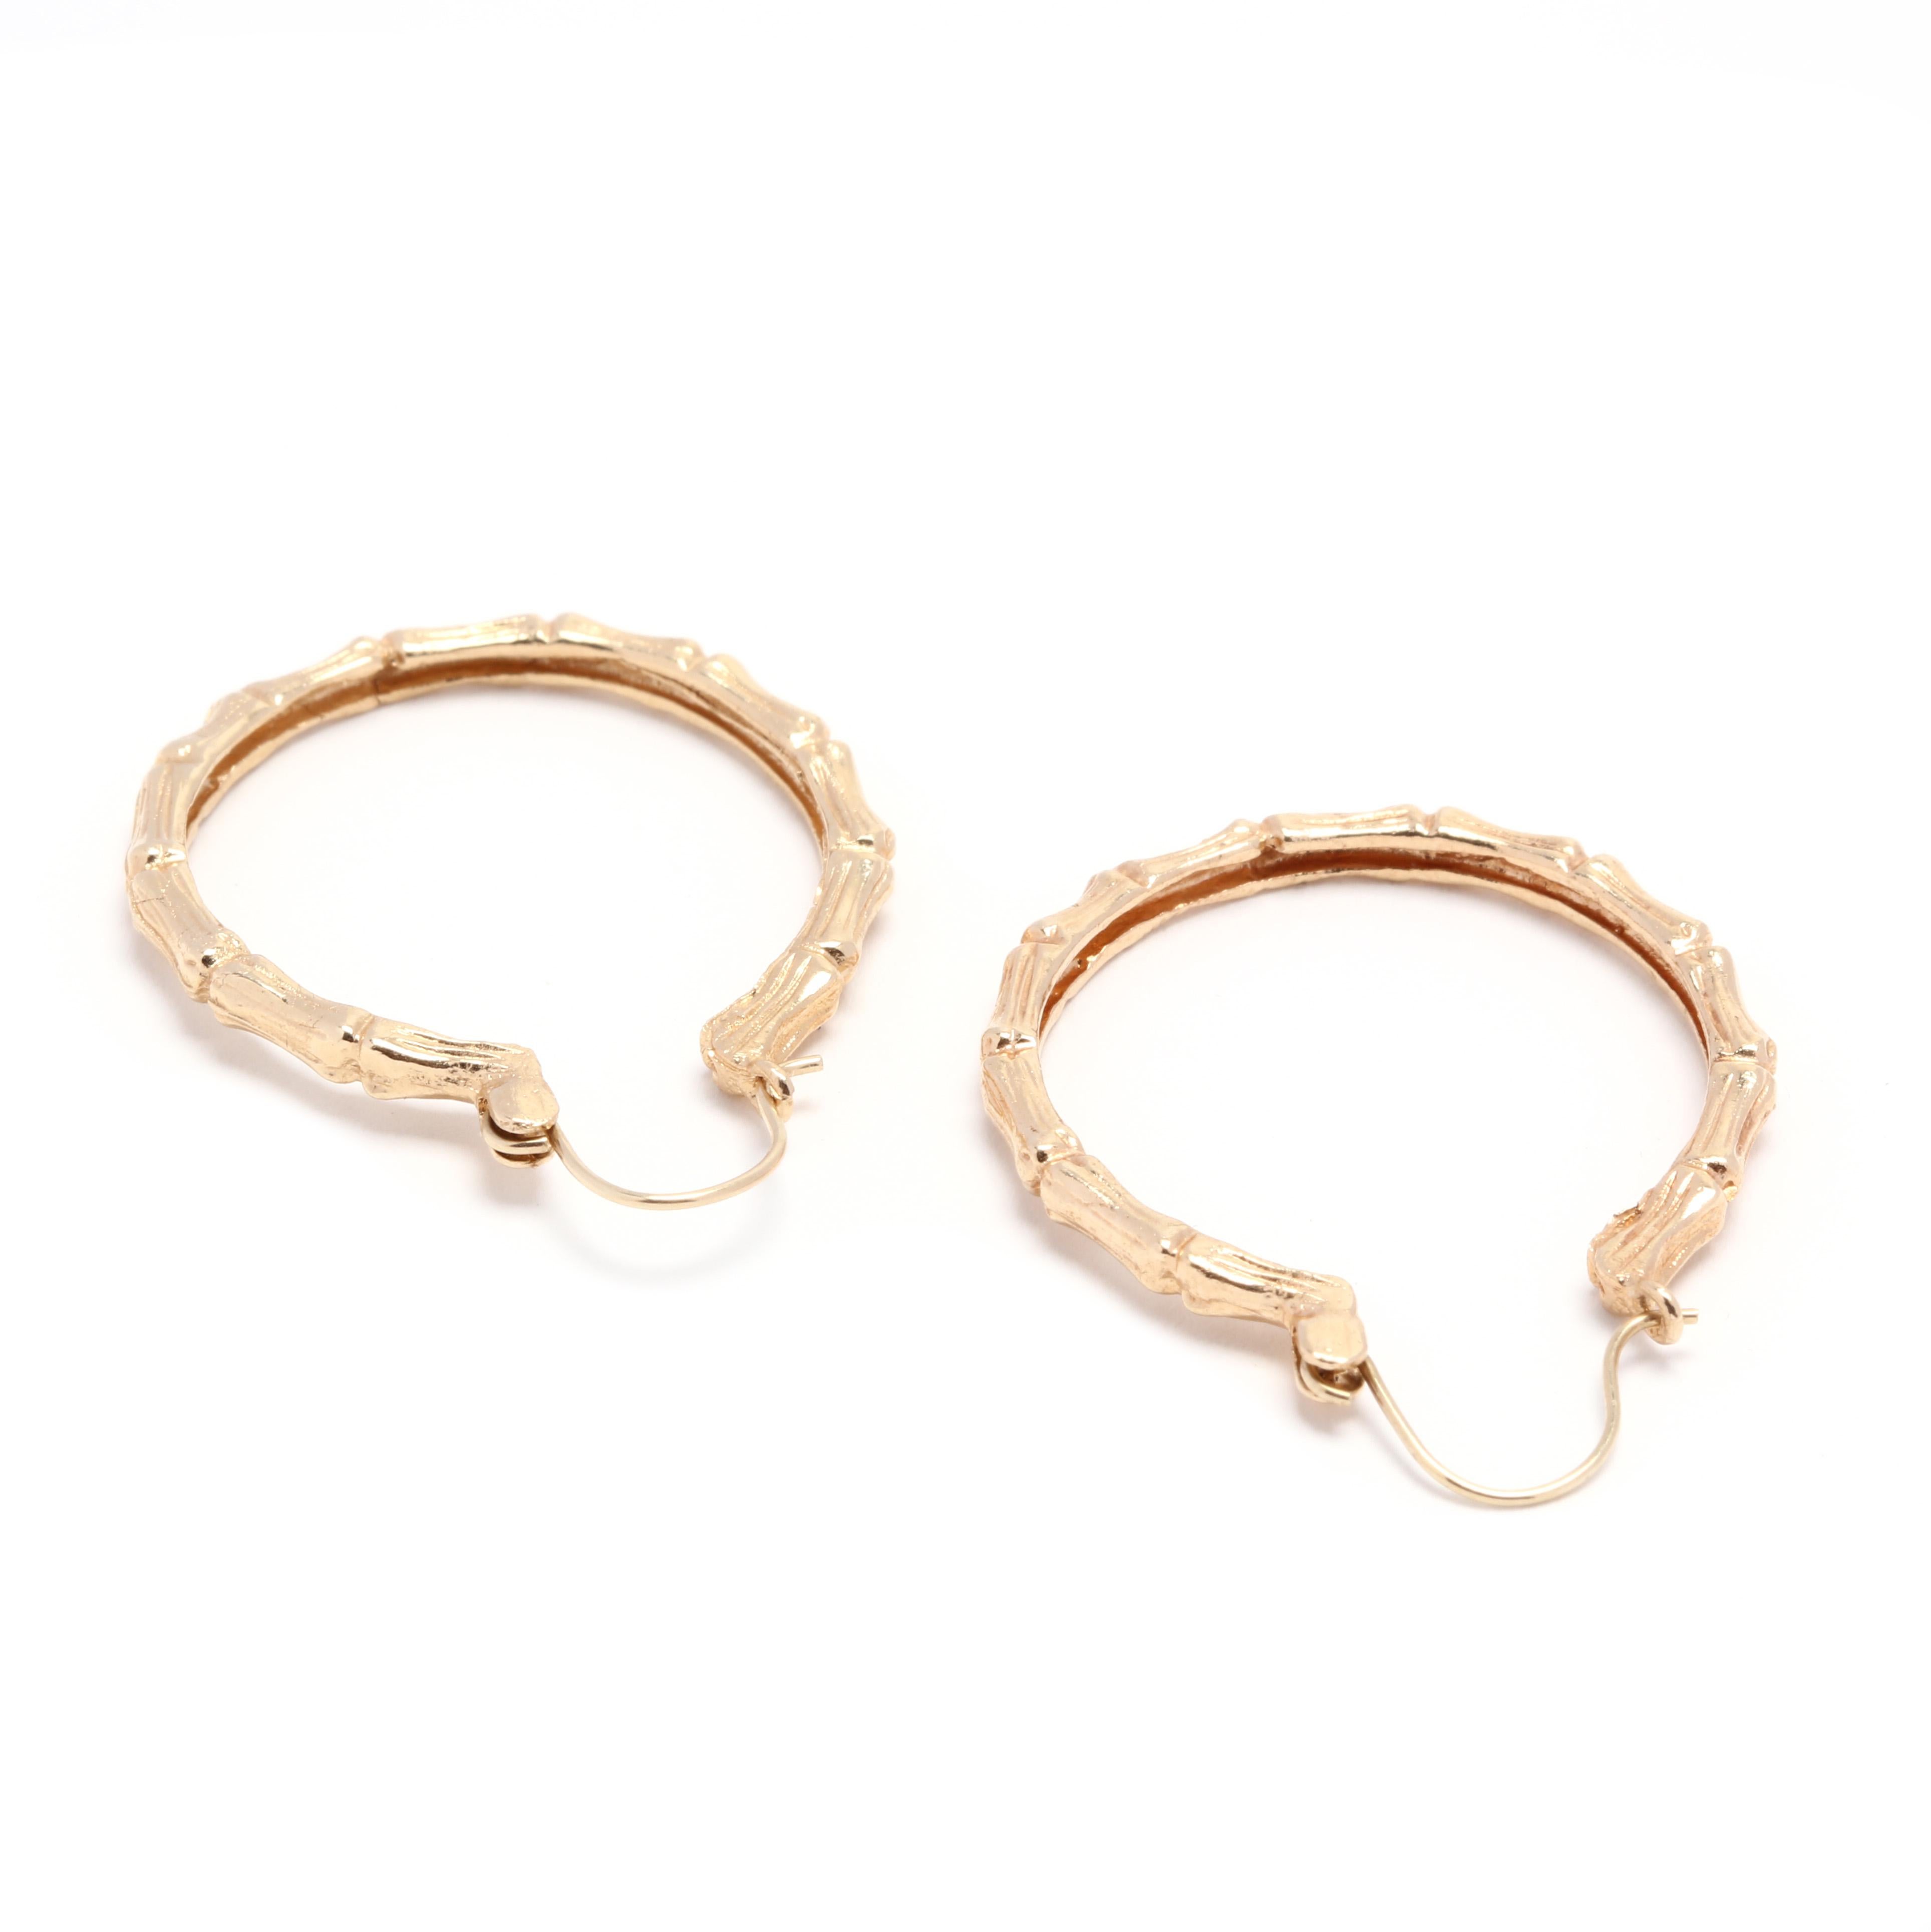 A pair of 14 karat yellow gold thin bamboo dangle hoop earrings. These earrings feature a thin bamboo motif design with a curved ear wire so that the hoops dangle slightly below the ear lobe.

Length: 1 in.

Width: 2.25 mm

2.95 dwts.

* Please note